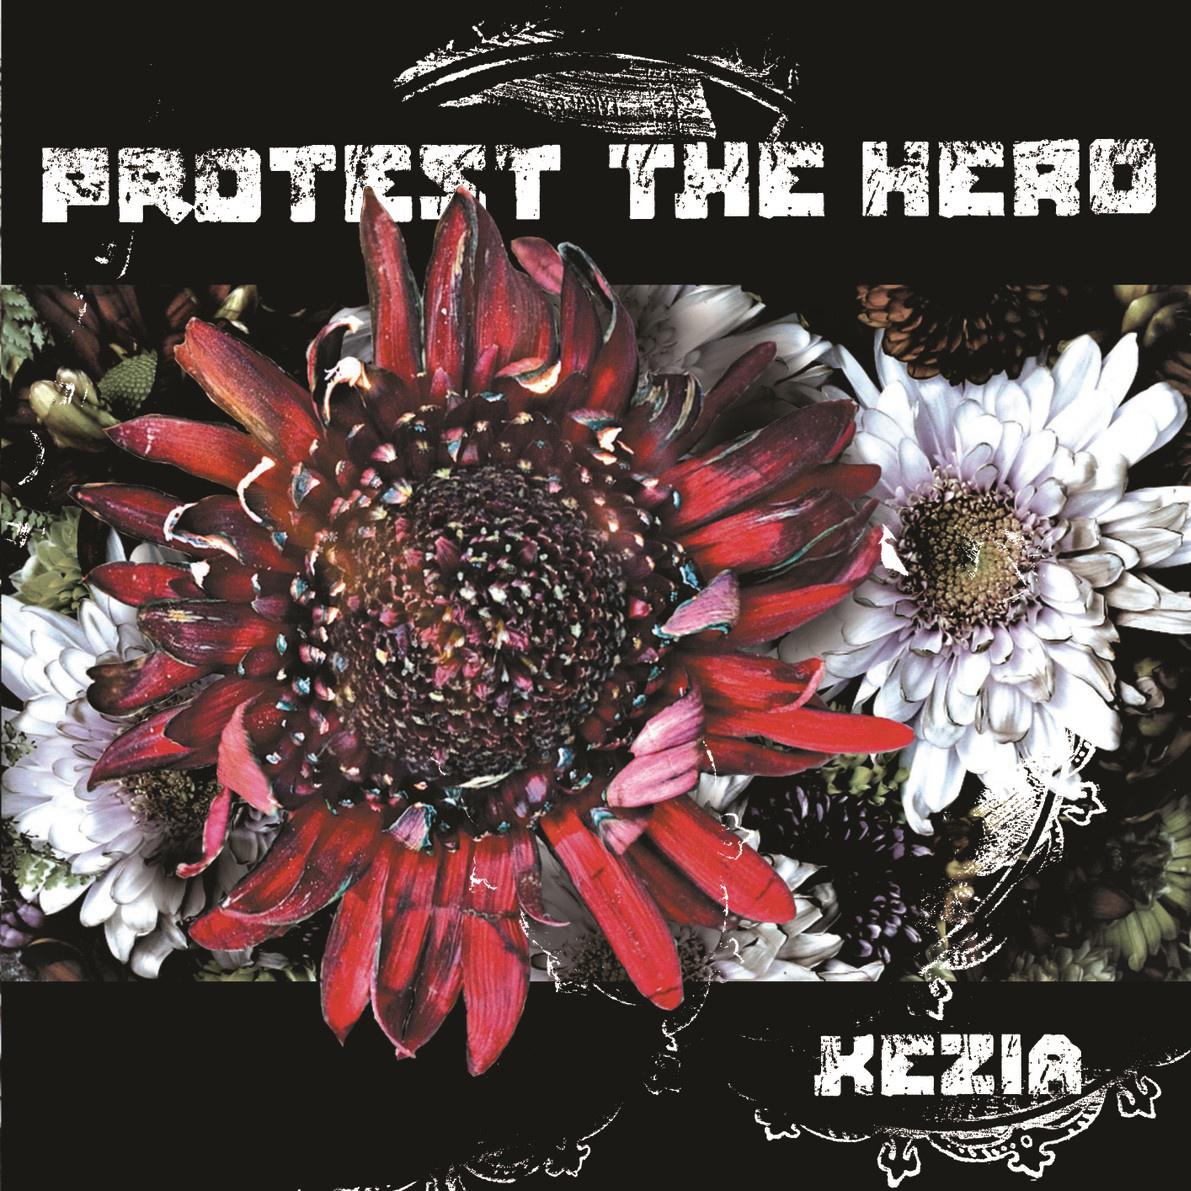 Protest the Hero - A Plateful of Our Dead